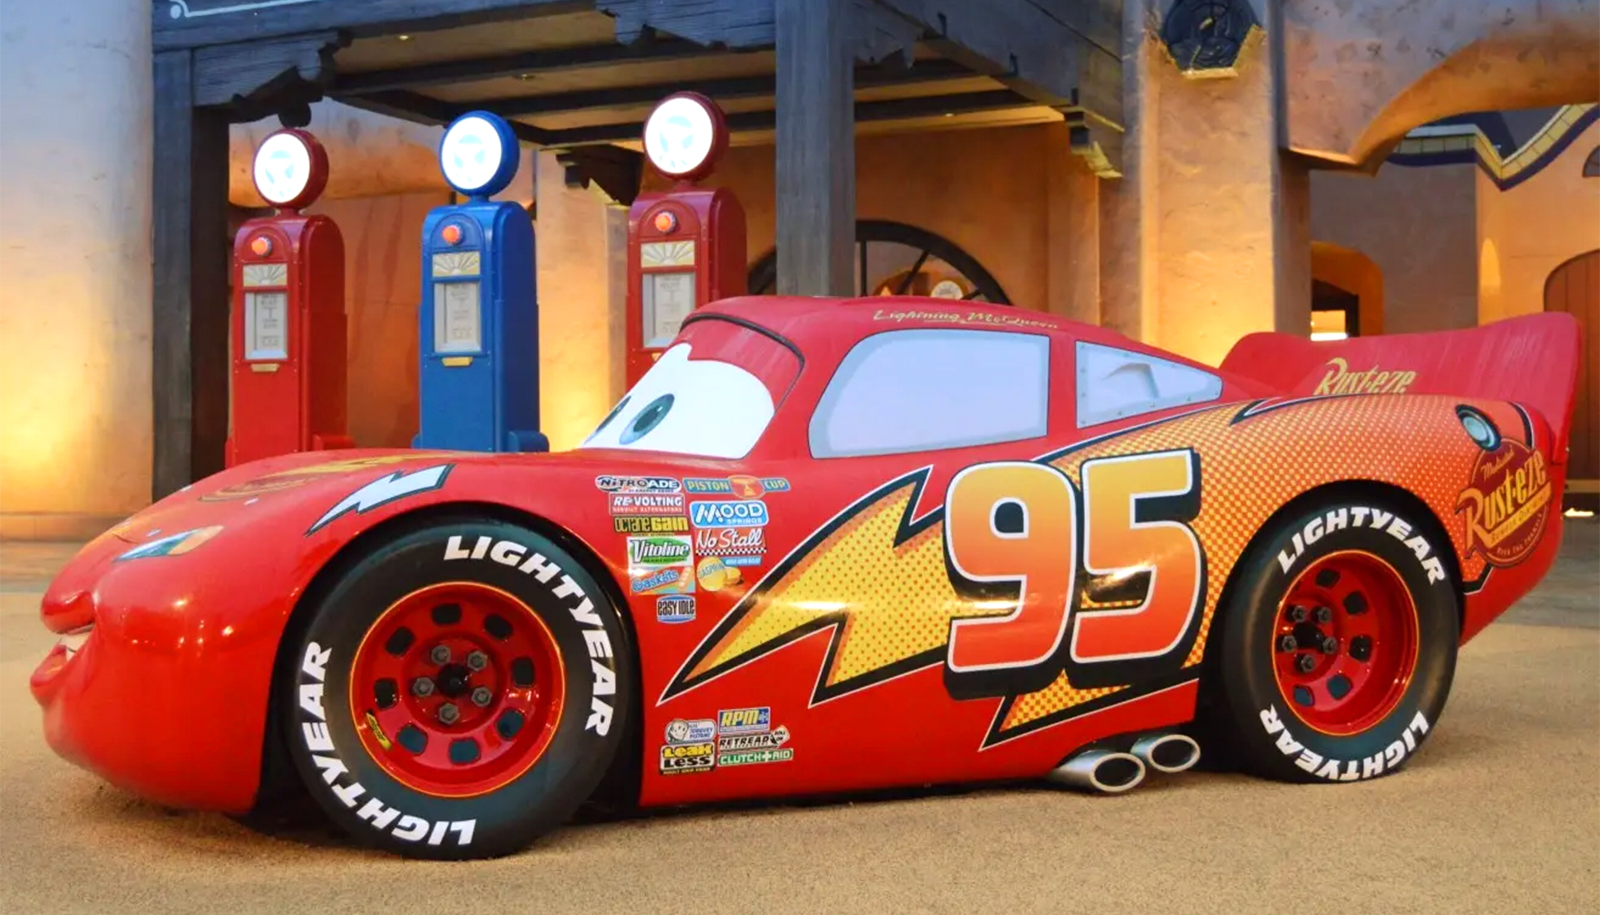 What kind of car is Lightning McQueen?